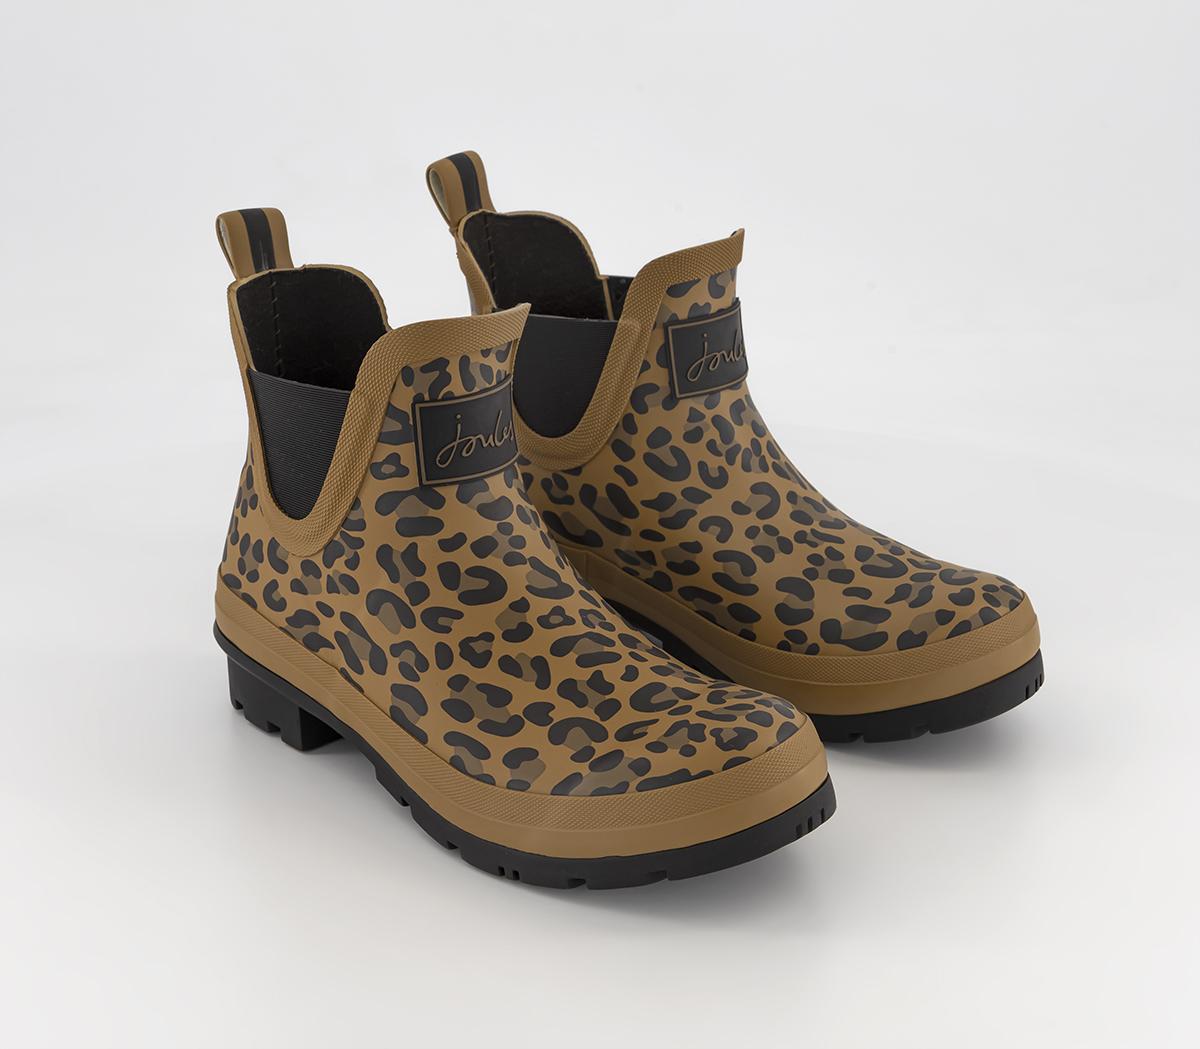 Joules Wellibob Wellies Leopard - Ankle Boots